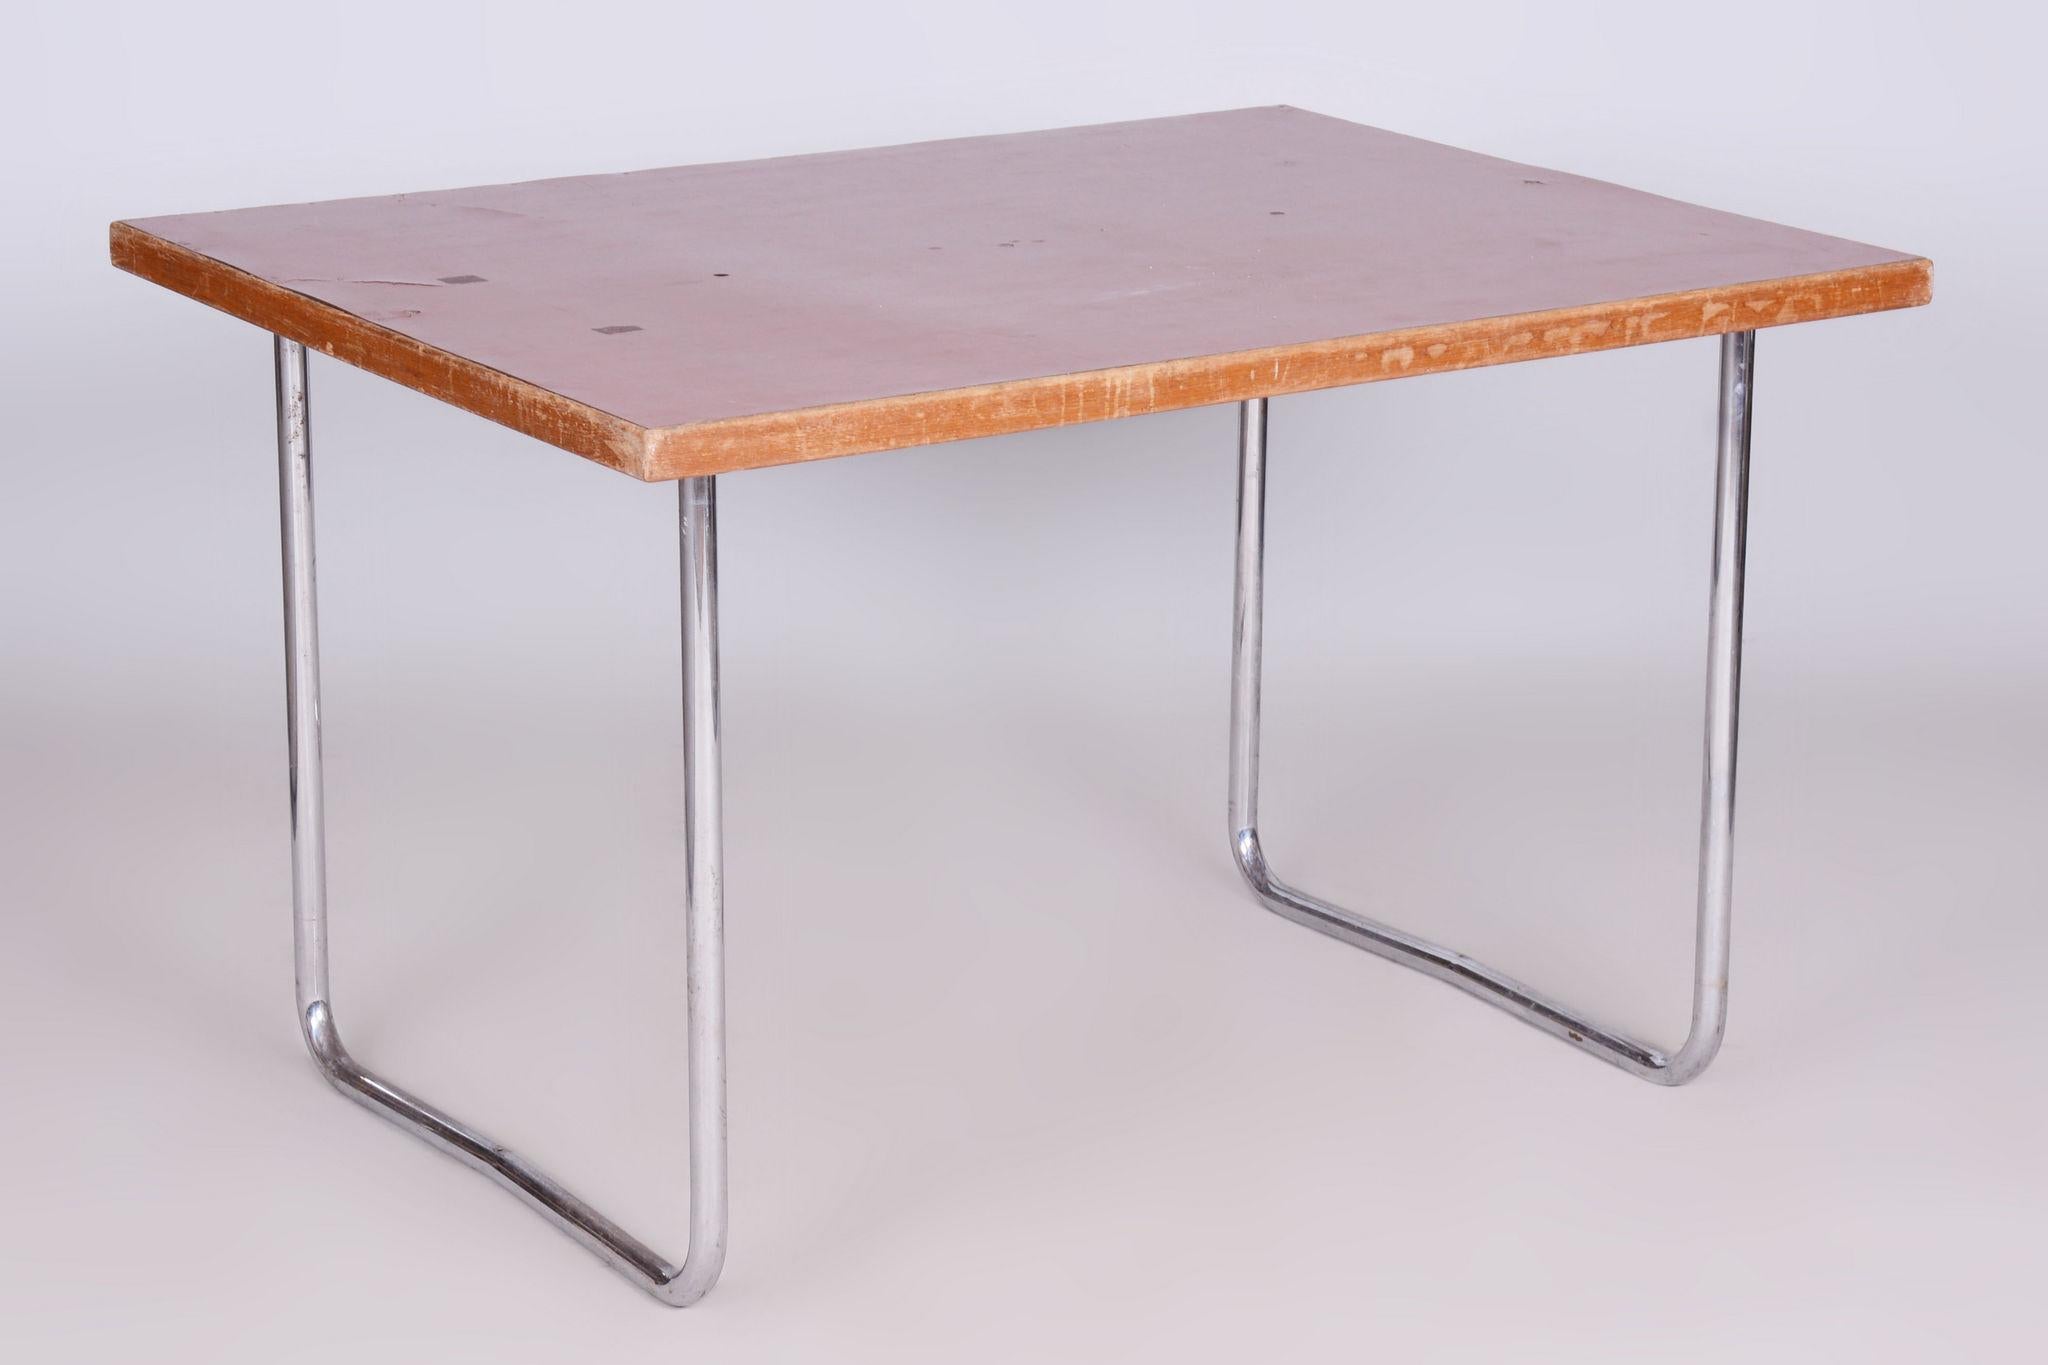 Original Bauhaus Dining Table, by Mücke - Melder, Well Preserved, Czech, 1930s In Good Condition For Sale In Horomerice, CZ